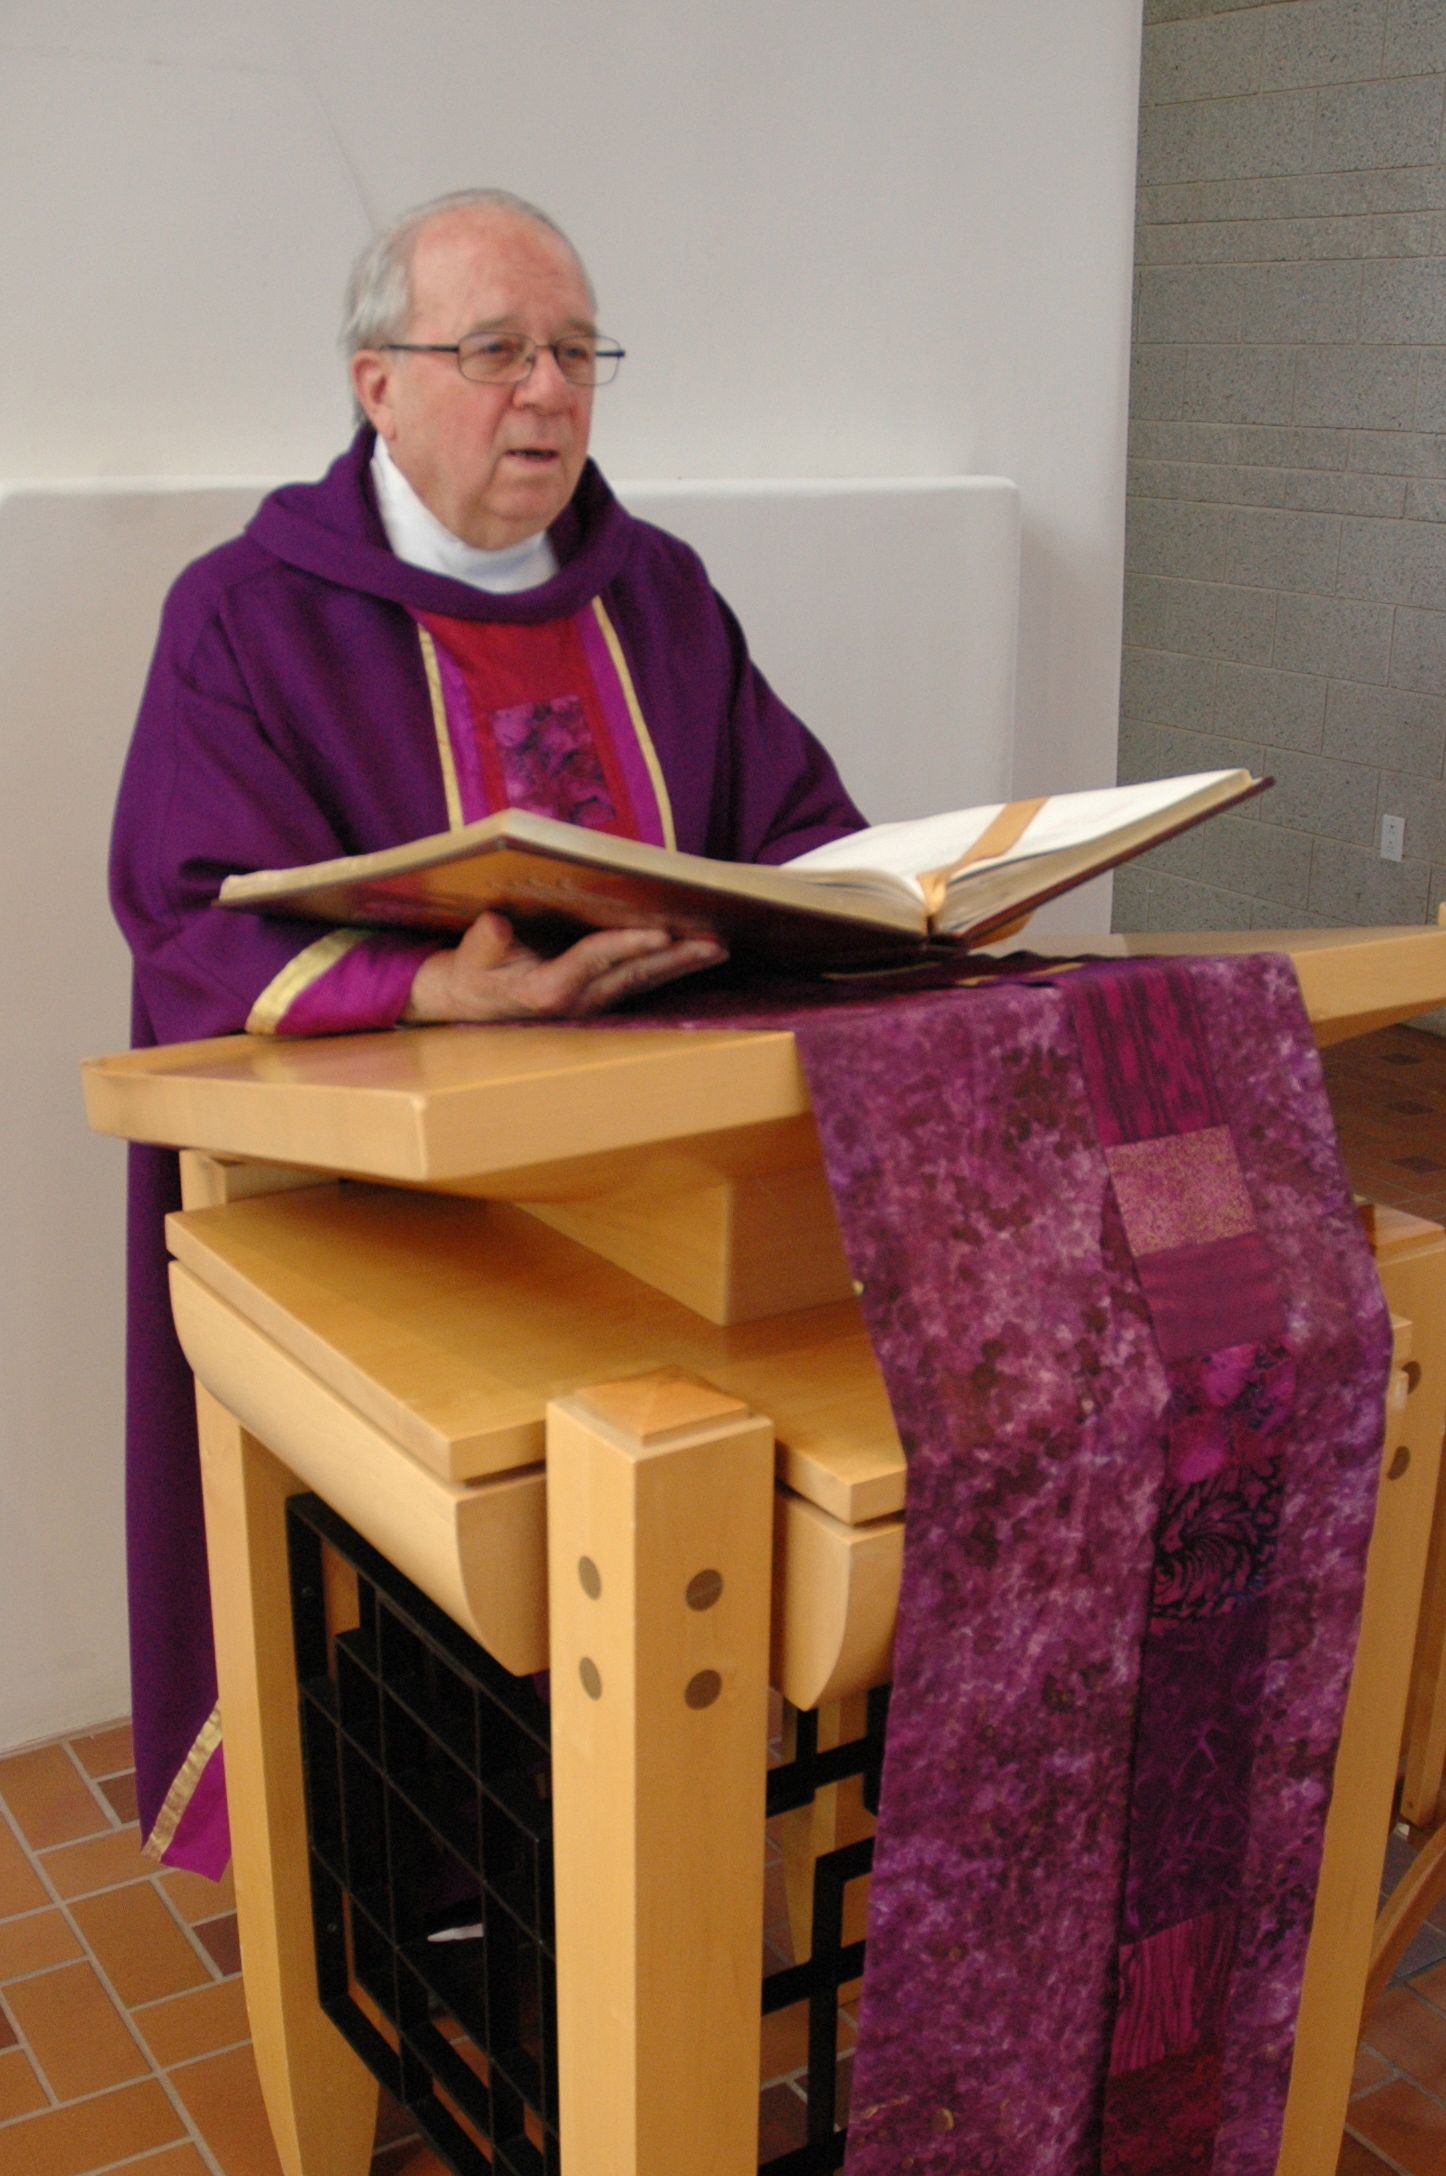 Lent at the Norbertine Community